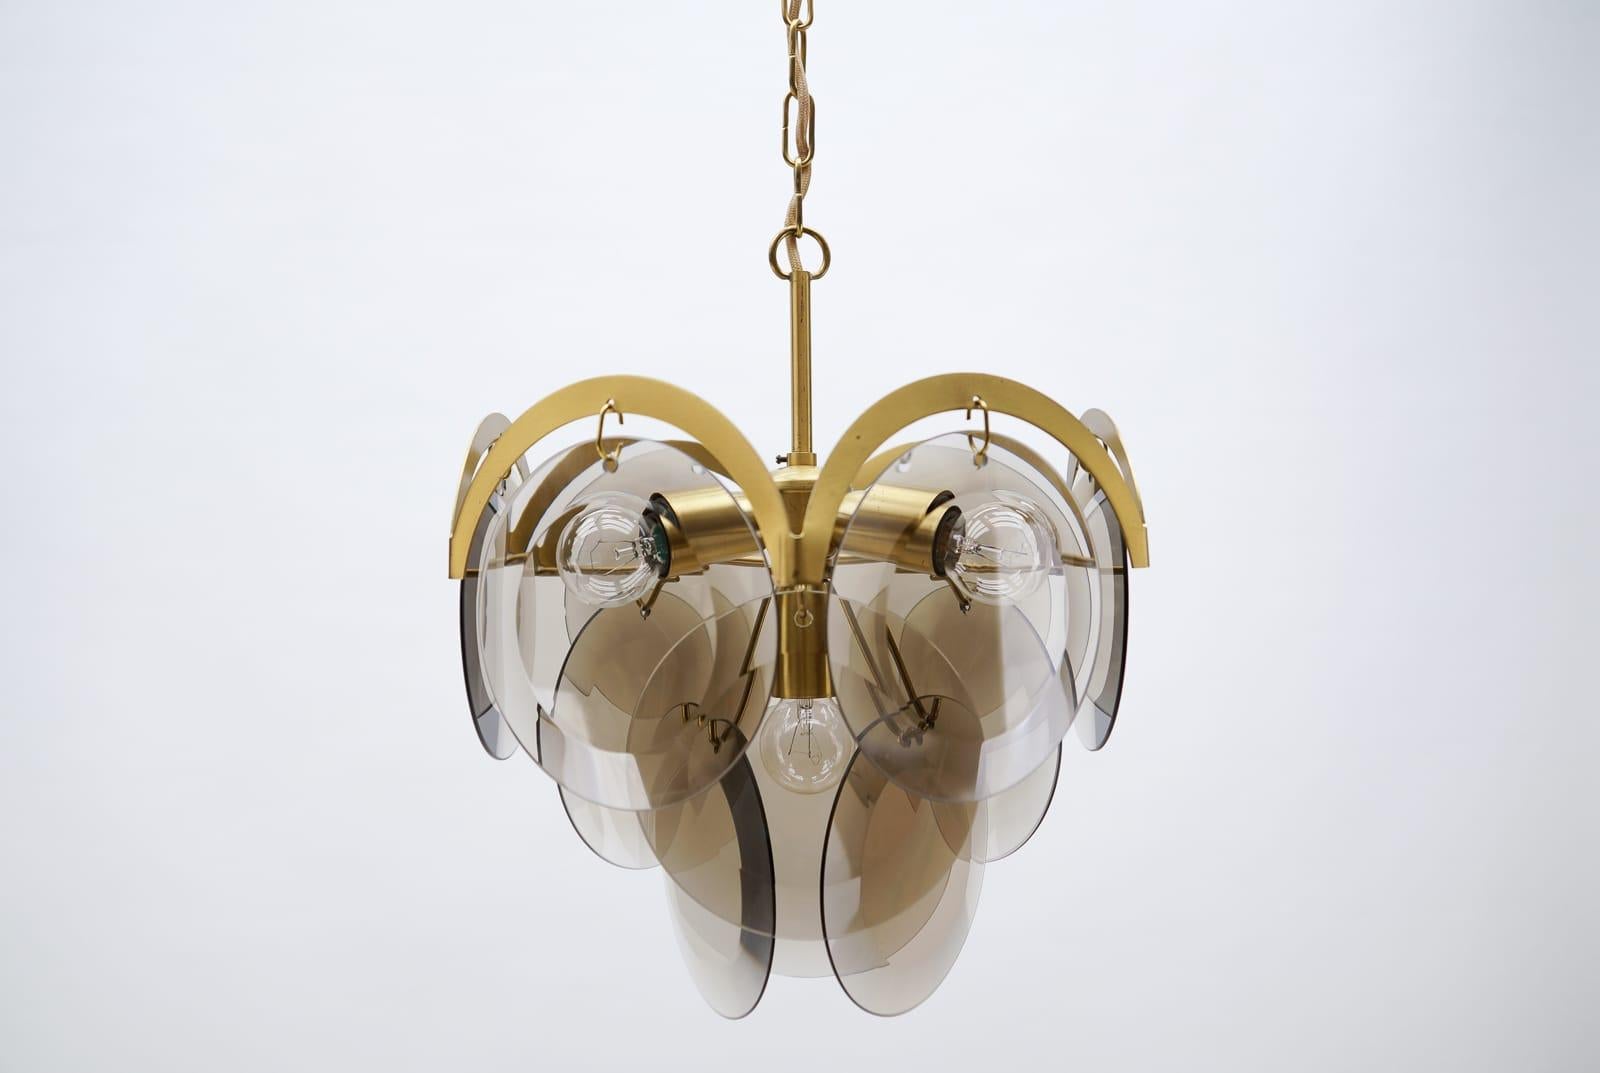 Very Elegant & Delicate Hanging Lamp with Smoked Glass Panes, 1960s Italy In Good Condition For Sale In Nürnberg, Bayern